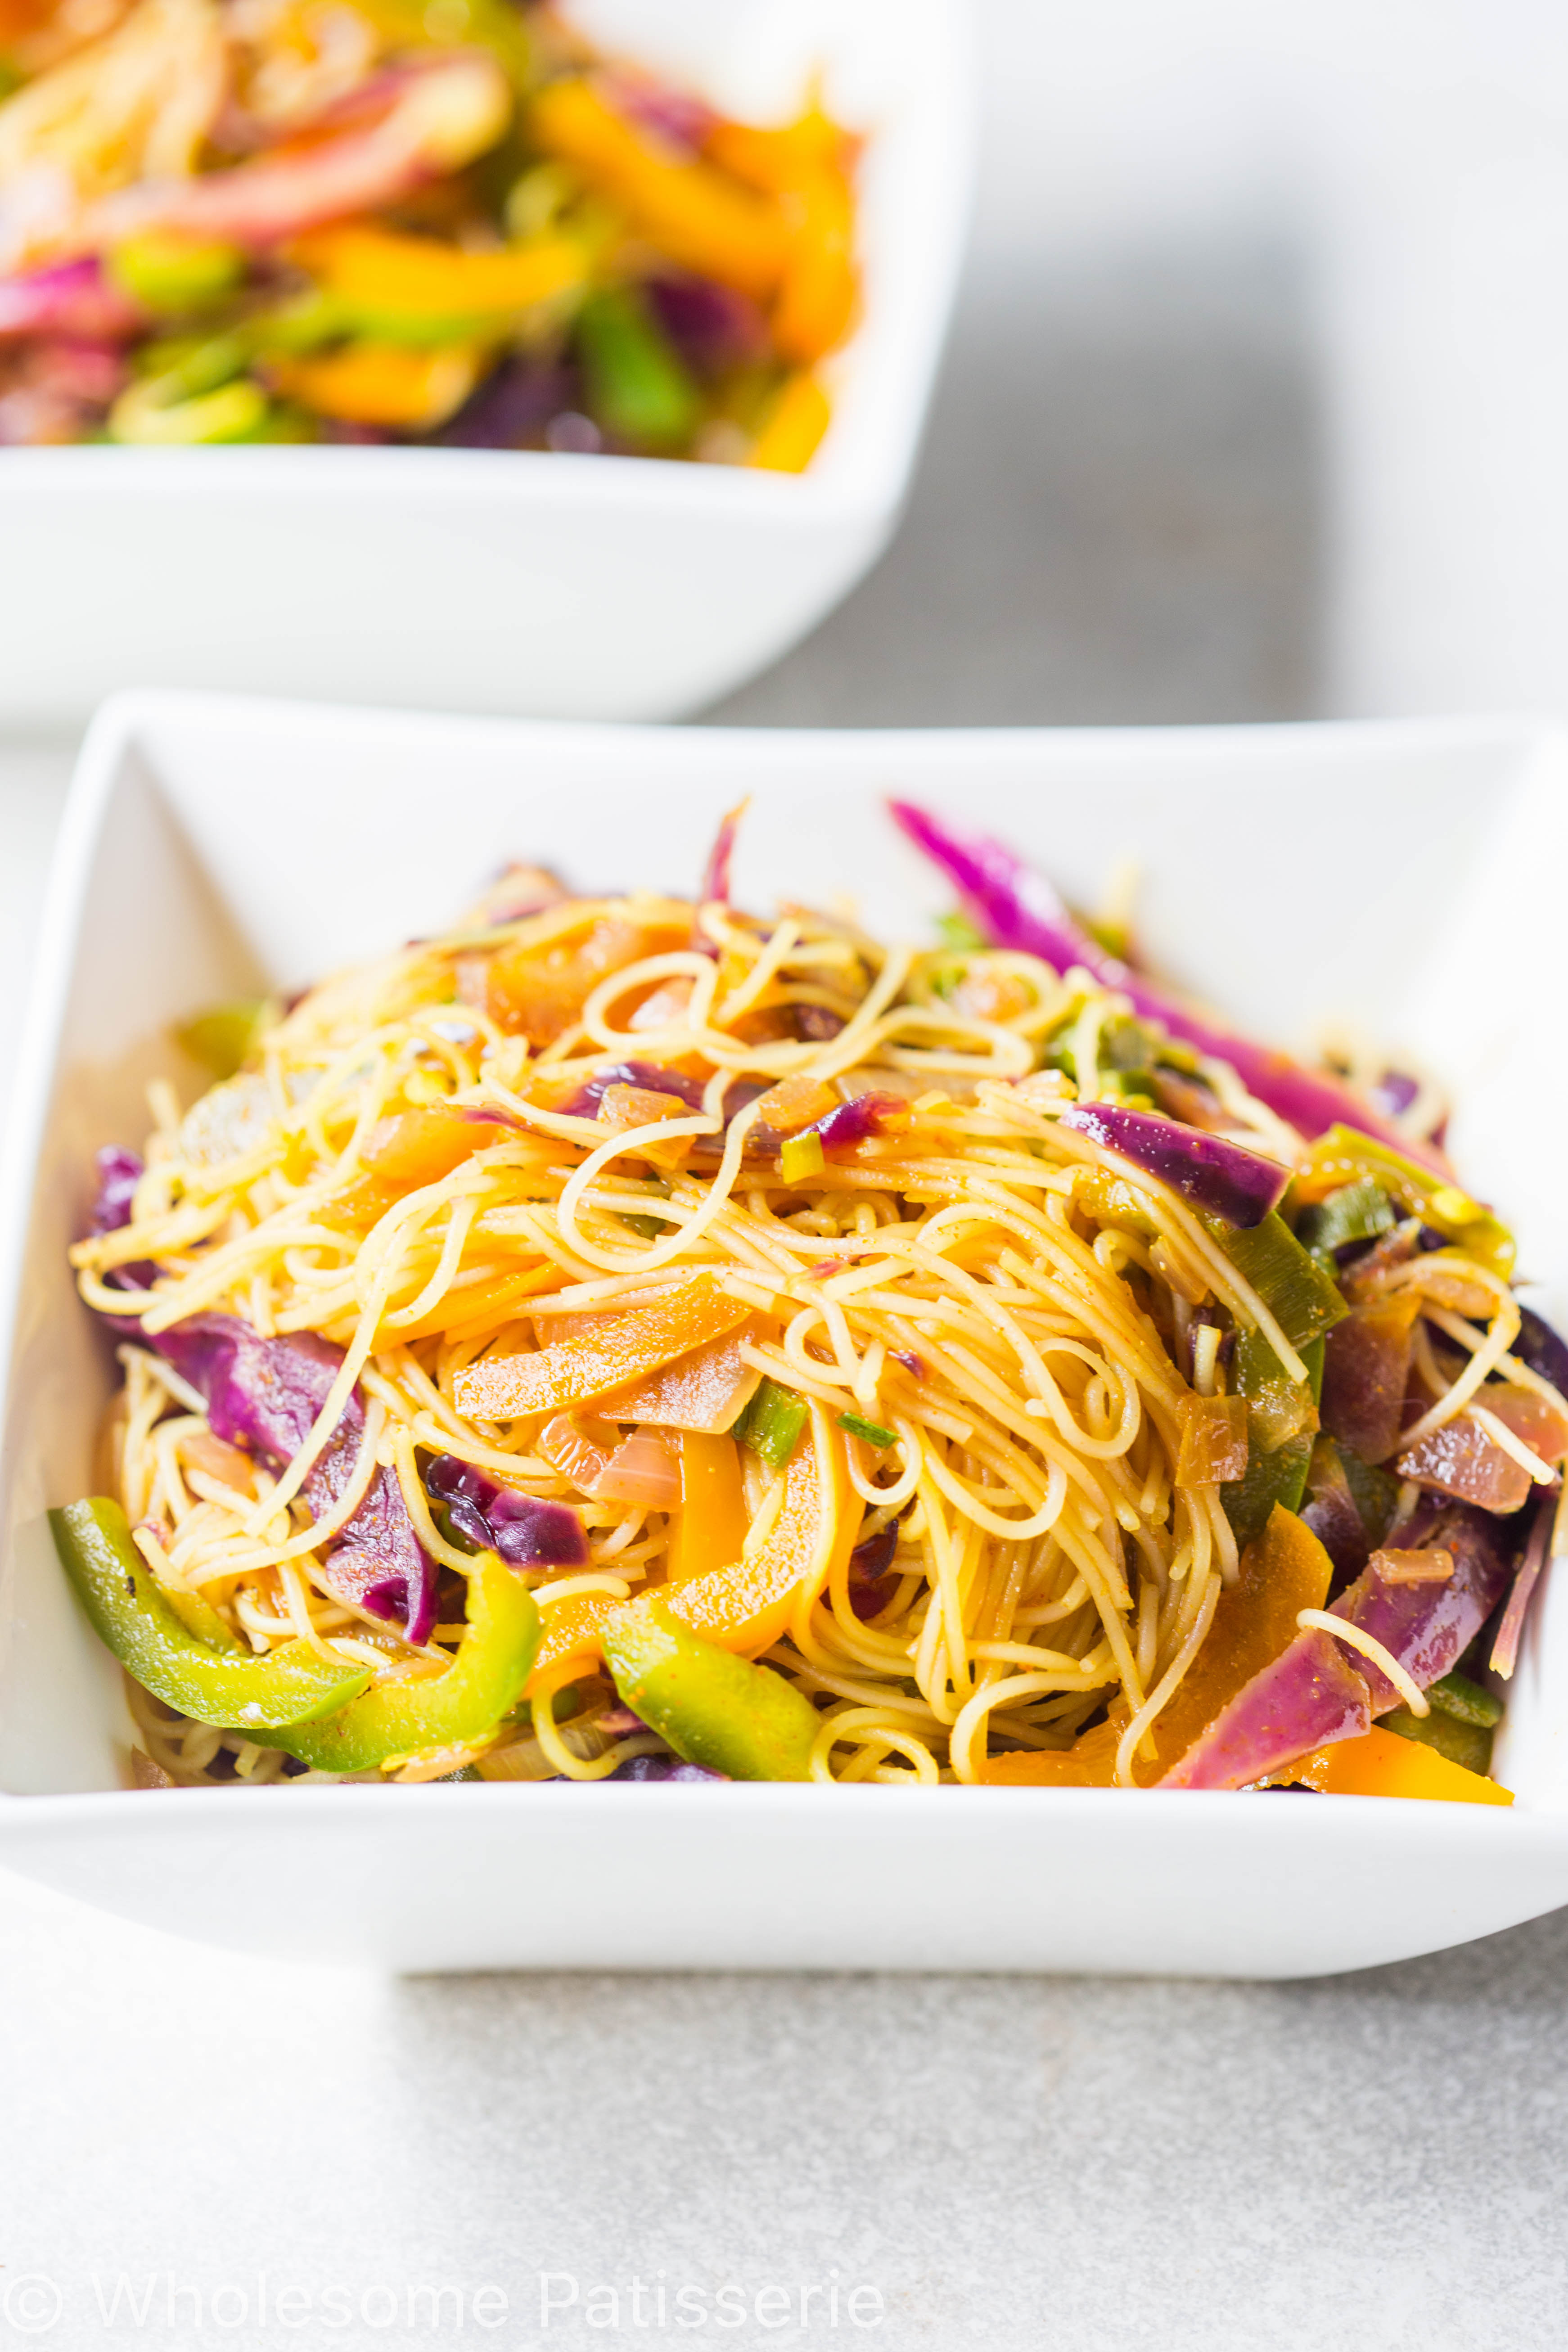 singapore-noodles-gluten-free-delicious-spicy-vegan-noodles-asian-spicy